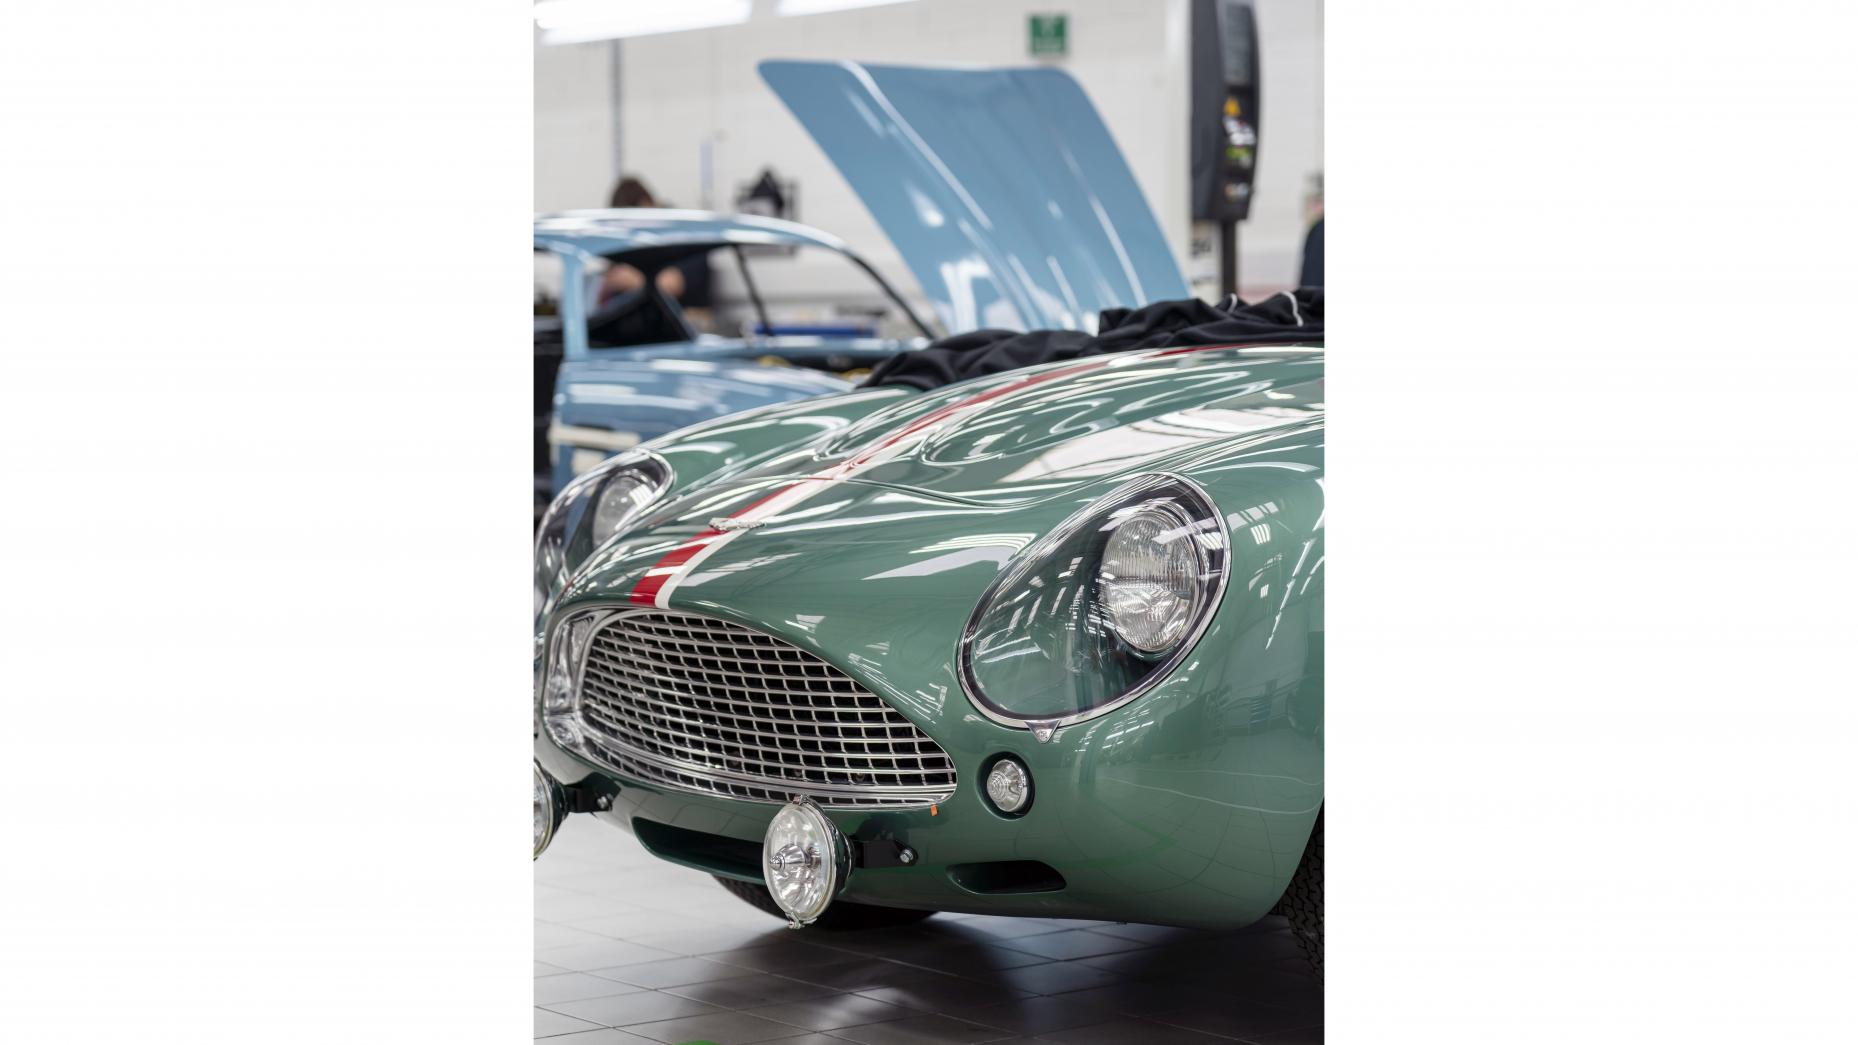 Here’s how the first customers have specced their DB4 GT Zagatos